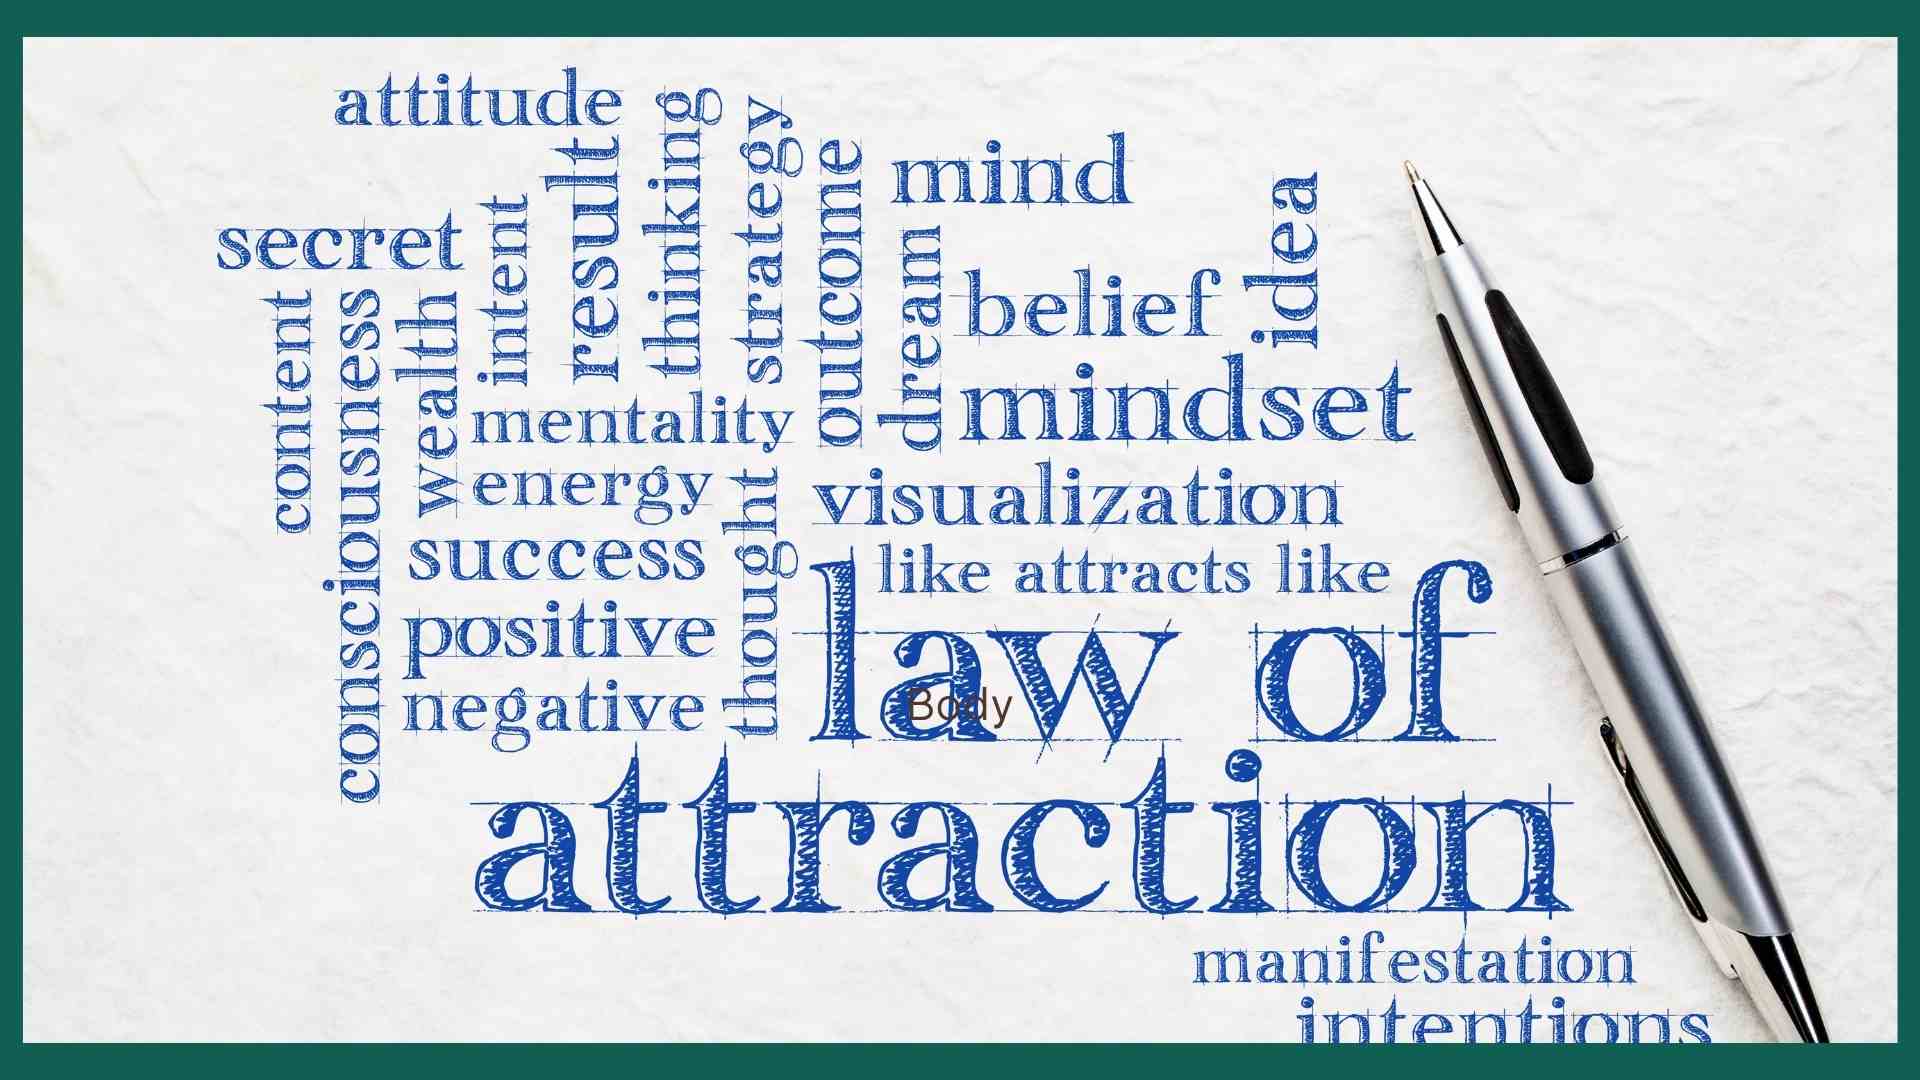 law-of-attraction